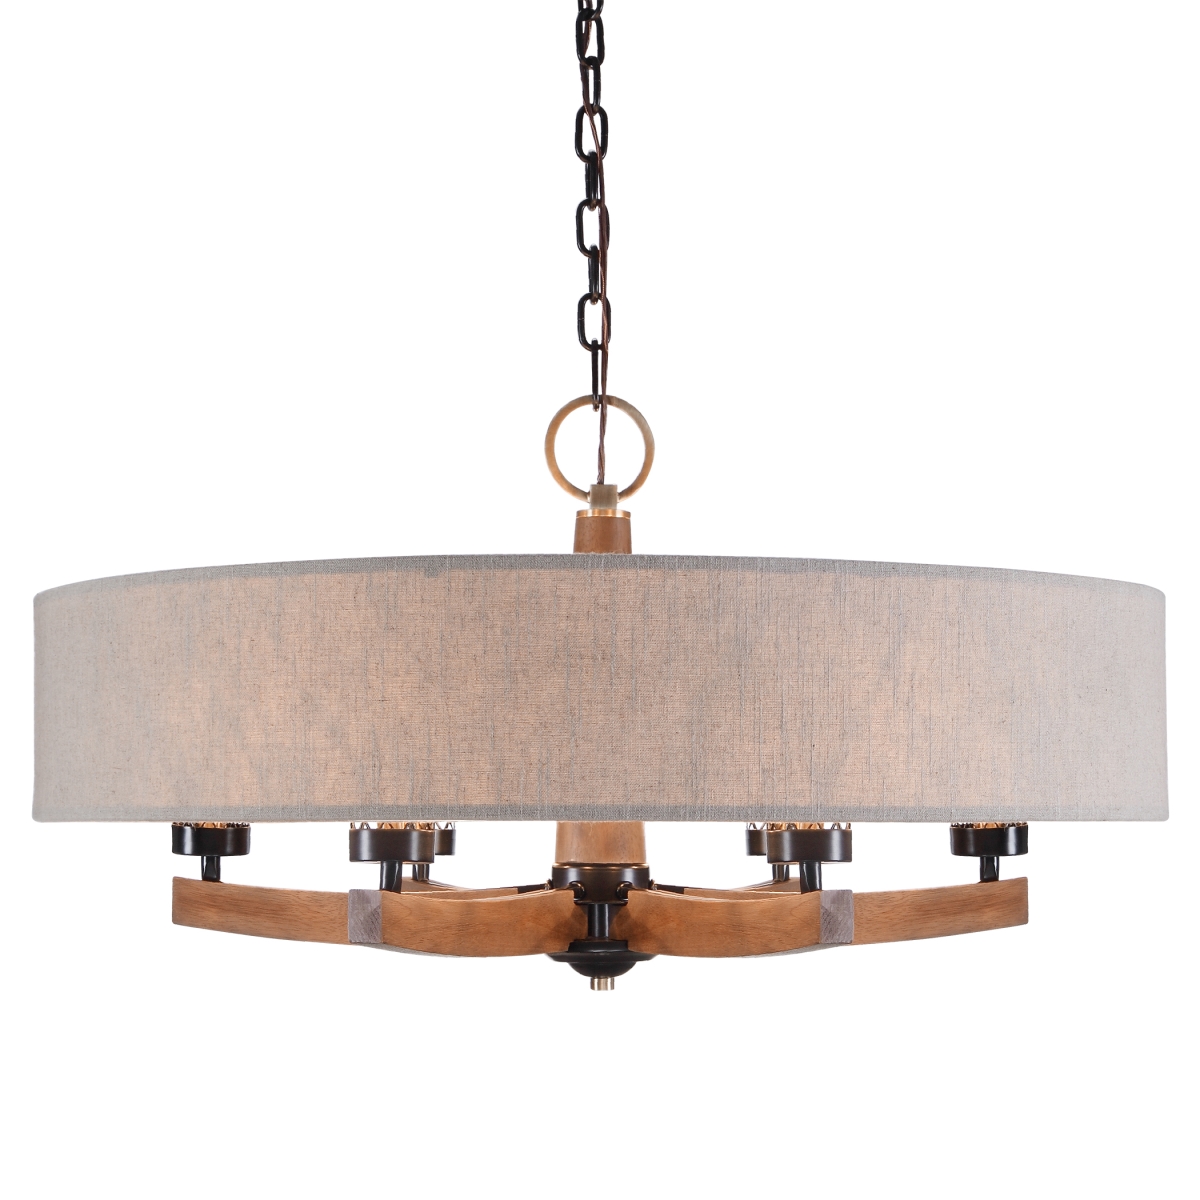 Picture of 212 Main 21331 Woodall 6 Light Drum Chandelier